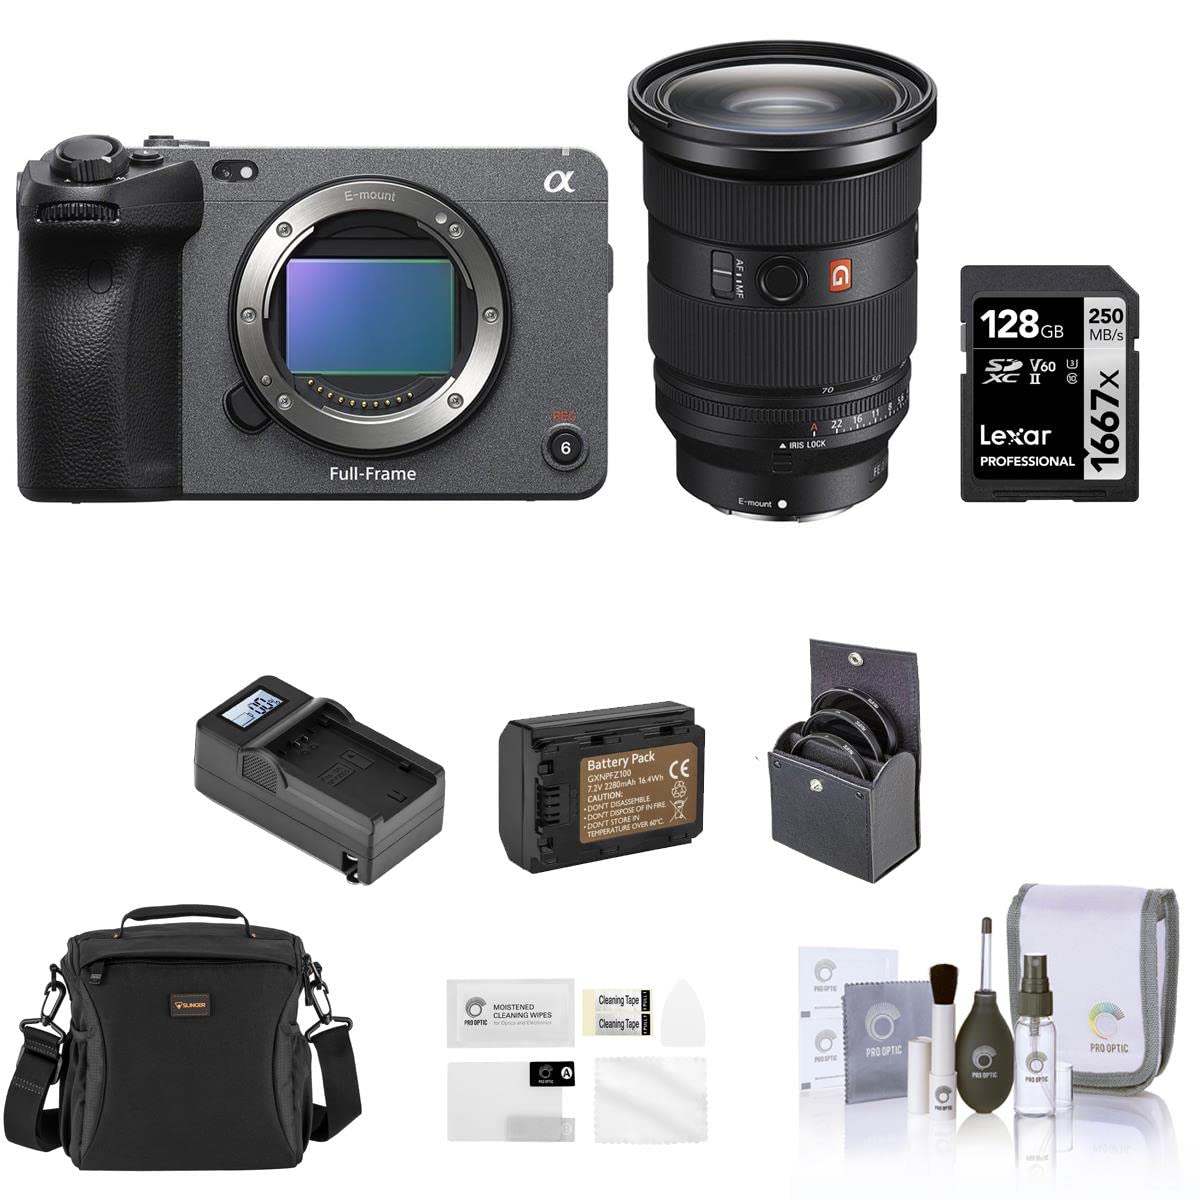 Sony FX3 Full-Frame Cinema Line Camera with 24-70mm Lens, Bundle with 128GB V90 SD Memory Card, Shoulder Bag, Extra Battery, Charger, 82mm Filter Kit, Screen Protector, Cleaning Kit